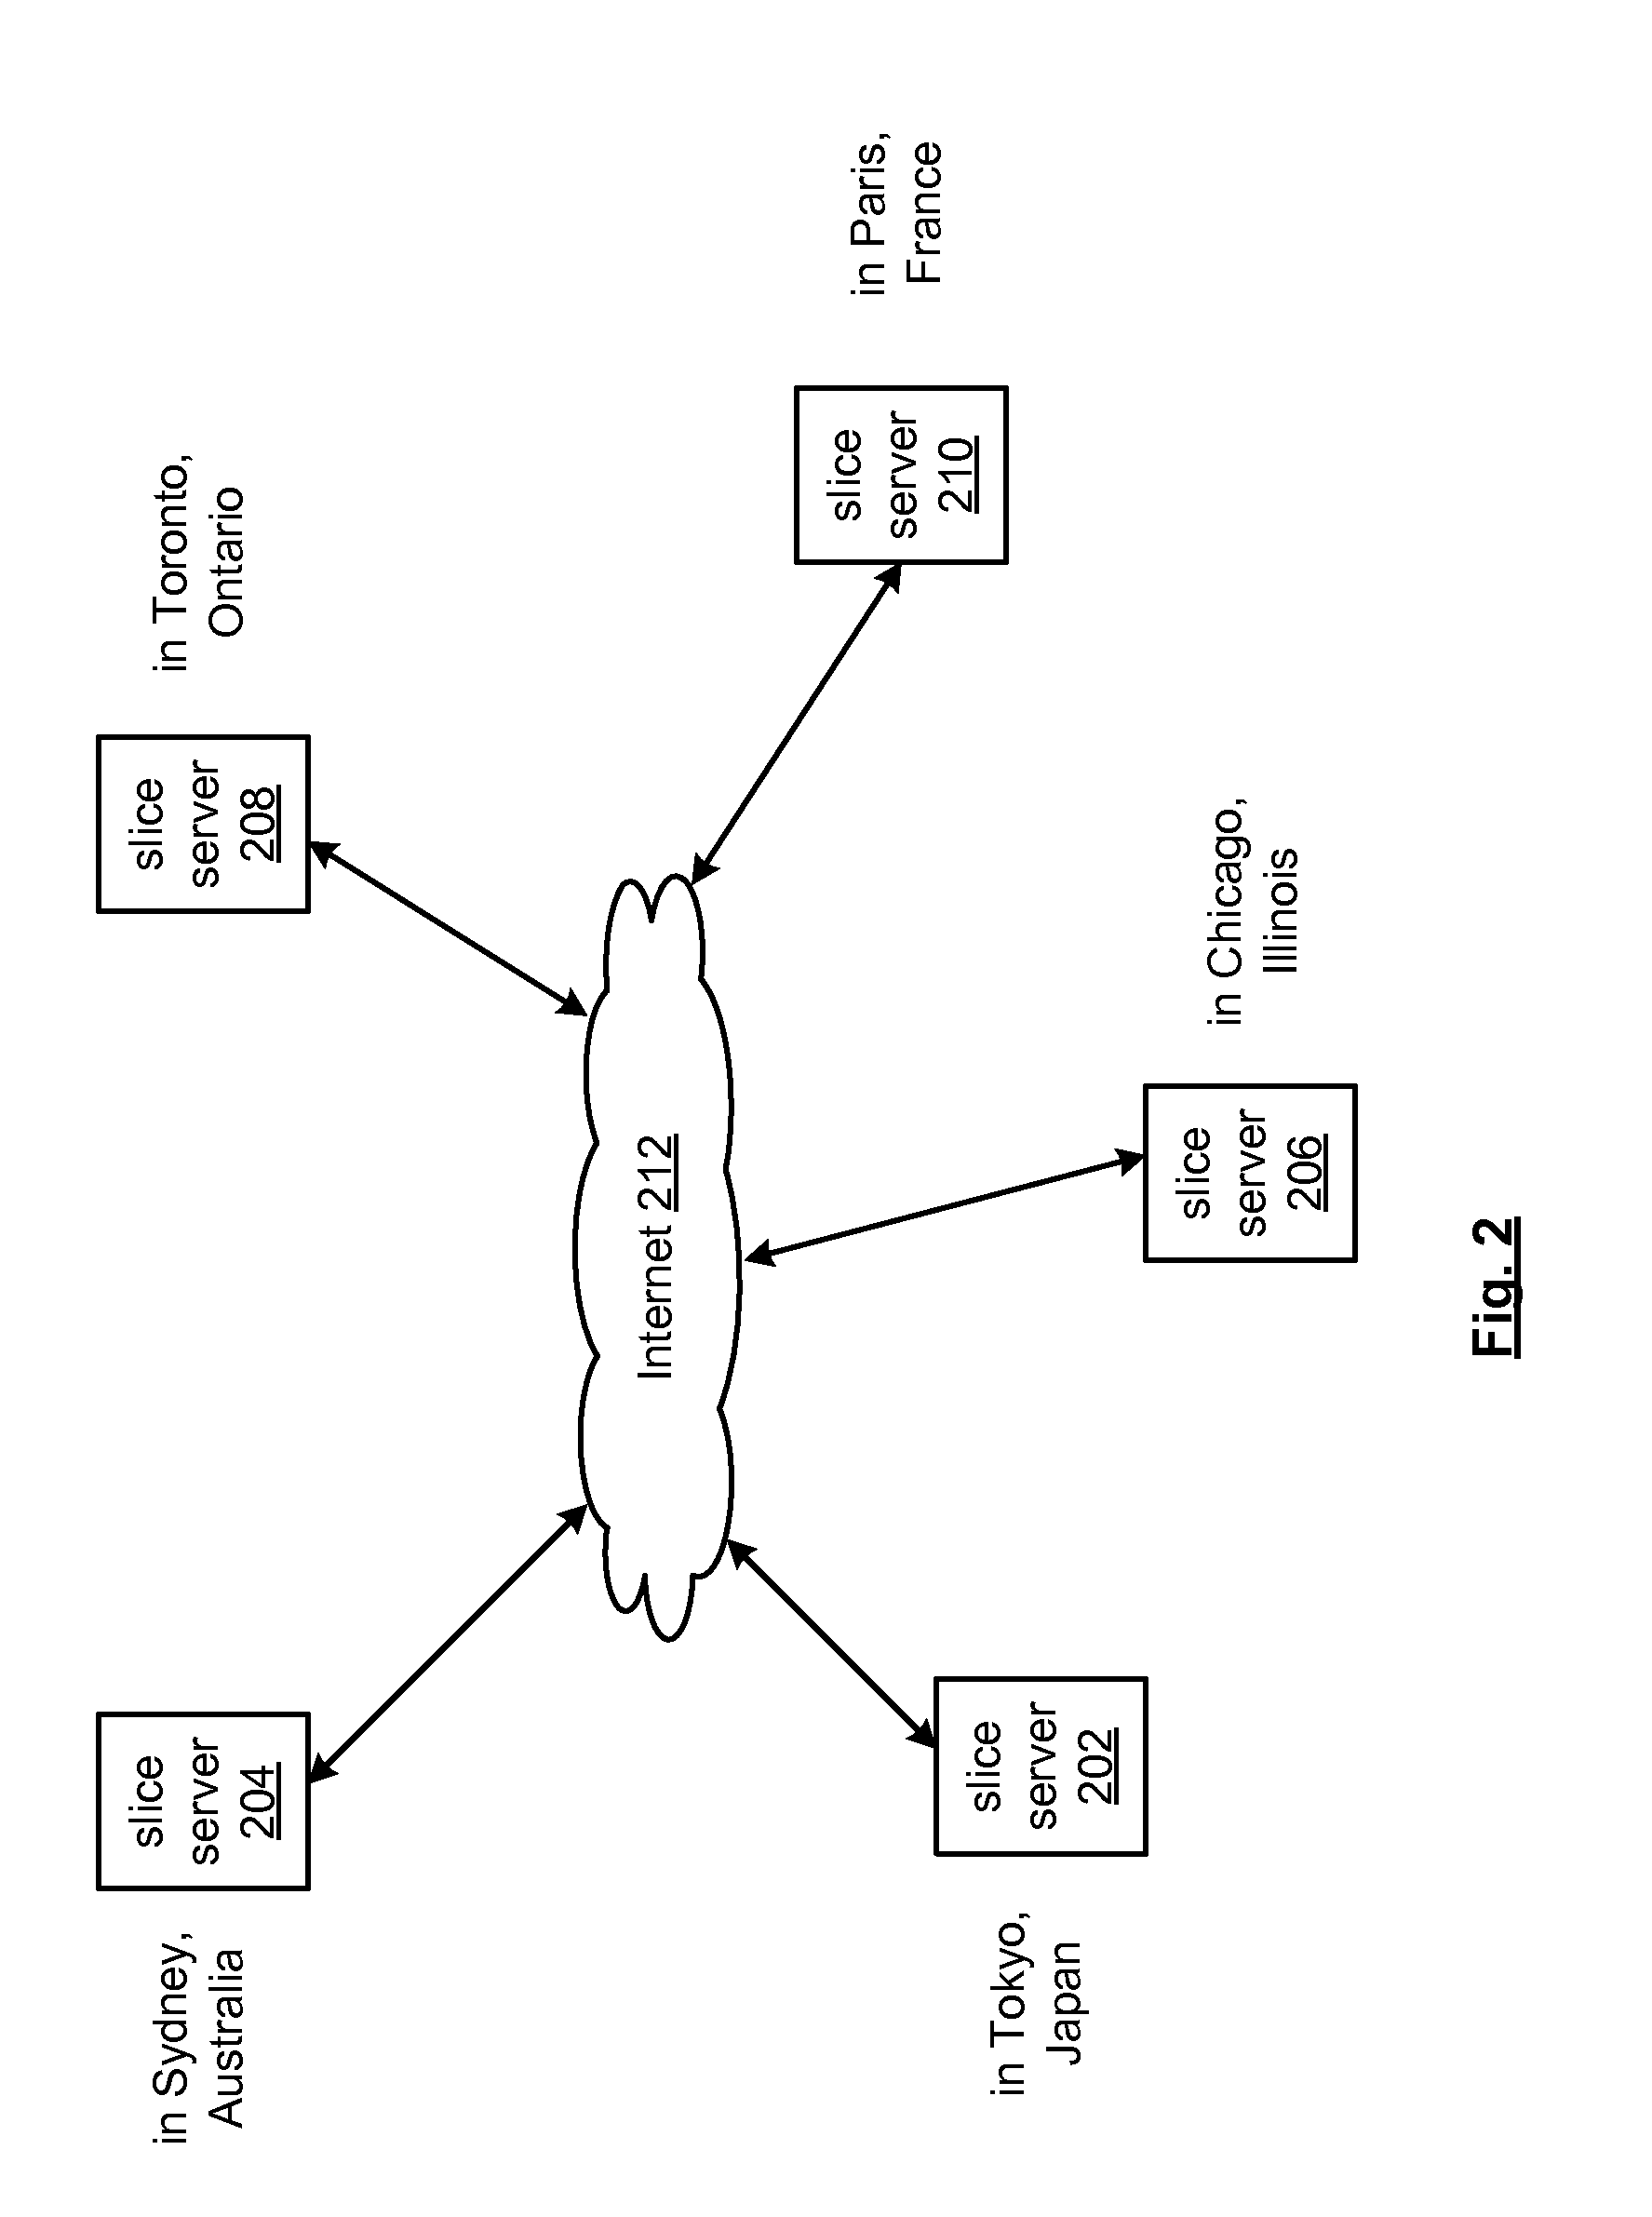 Smart access to a dispersed data storage network